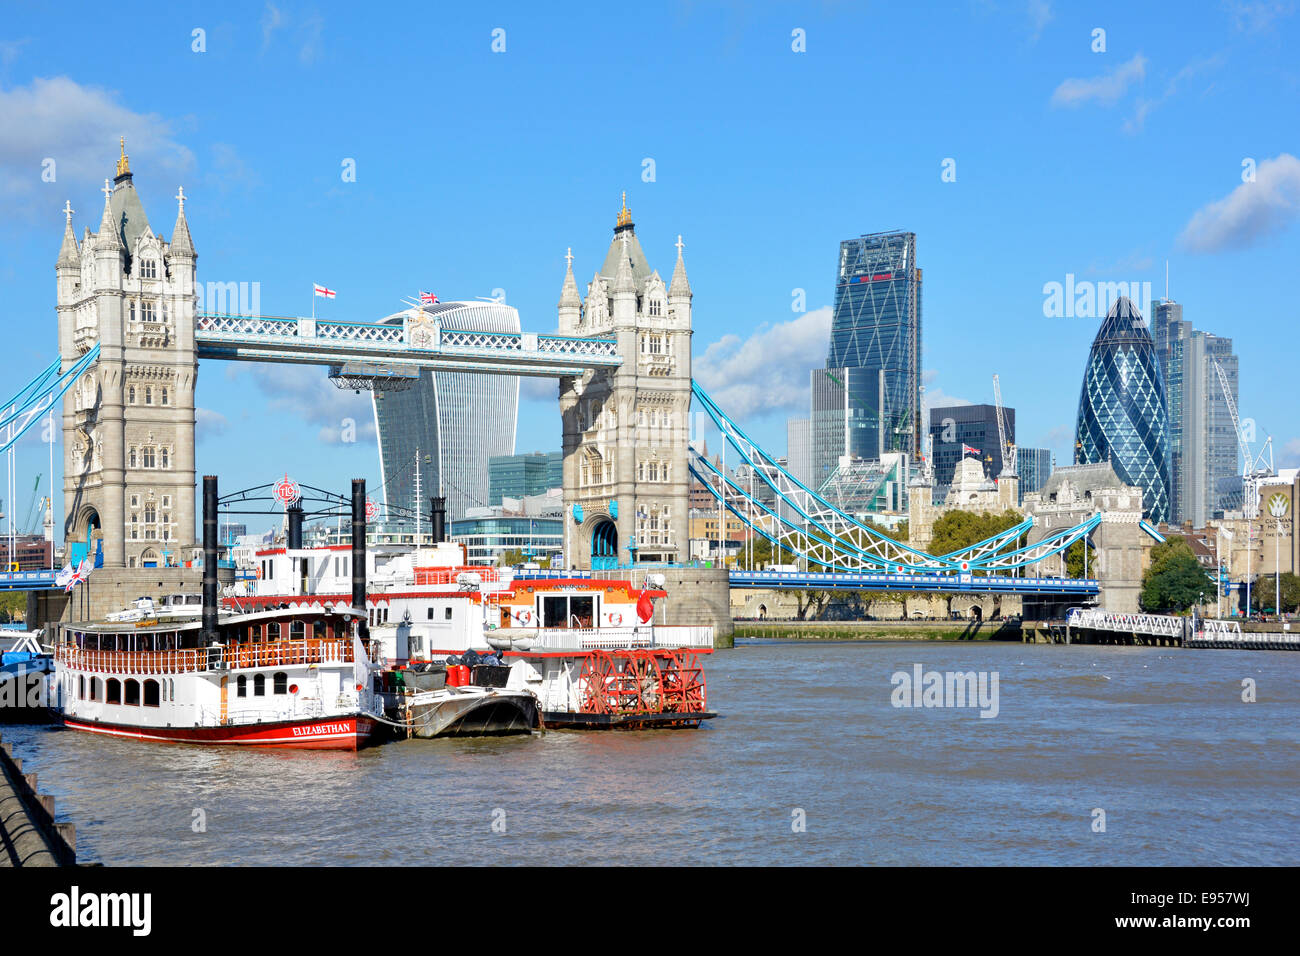 Replica paddle tour boats on the River Thames with Tower Bridge and City London 2014 cityscape skyline beyond Stock Photo